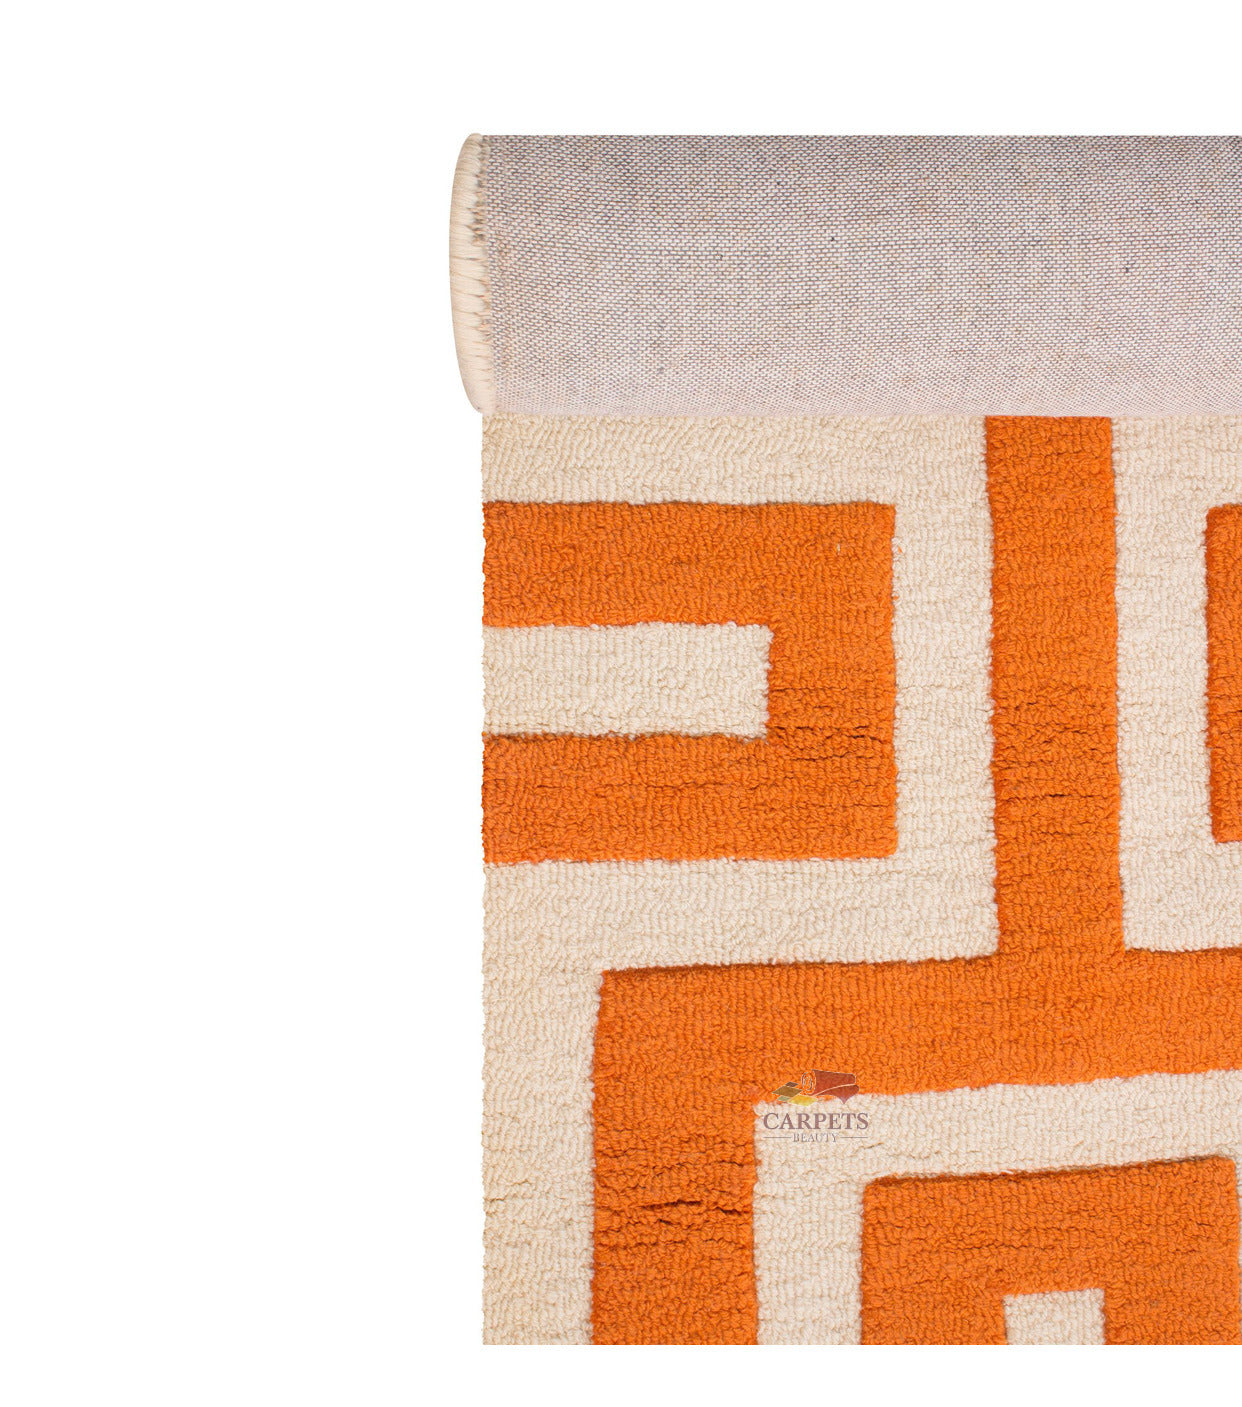 Beautiful Orange & White Geometric Woolen Rug for bedrooms and drawing living rooms